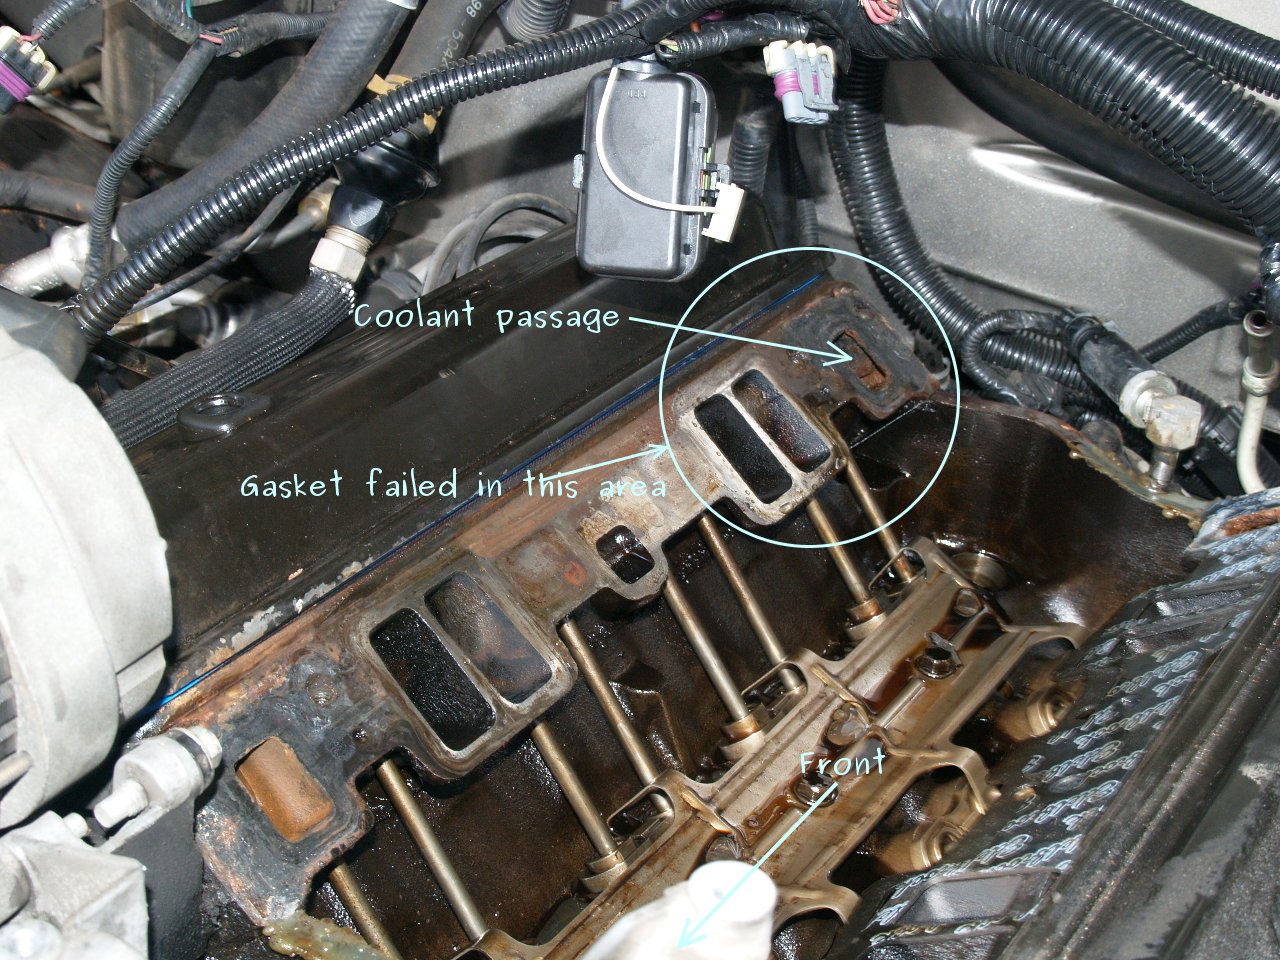 See P21C5 in engine